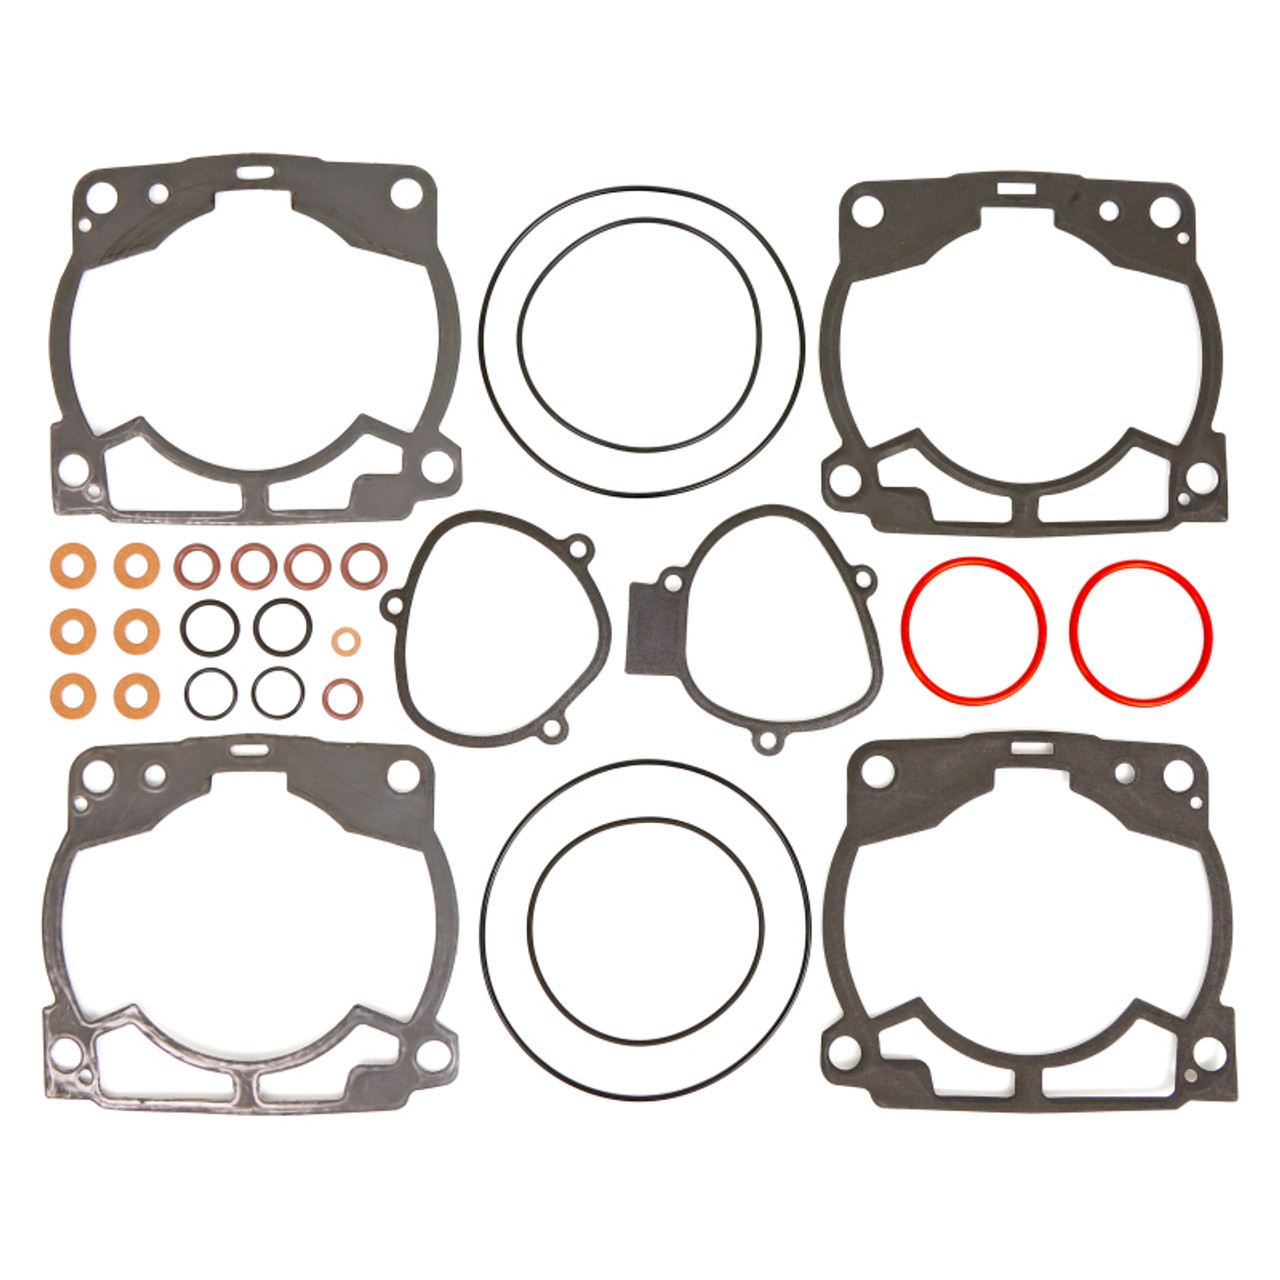 Cometic 17-22 KTM 250 SX Top End Gasket Kit - C3623 Photo - Primary